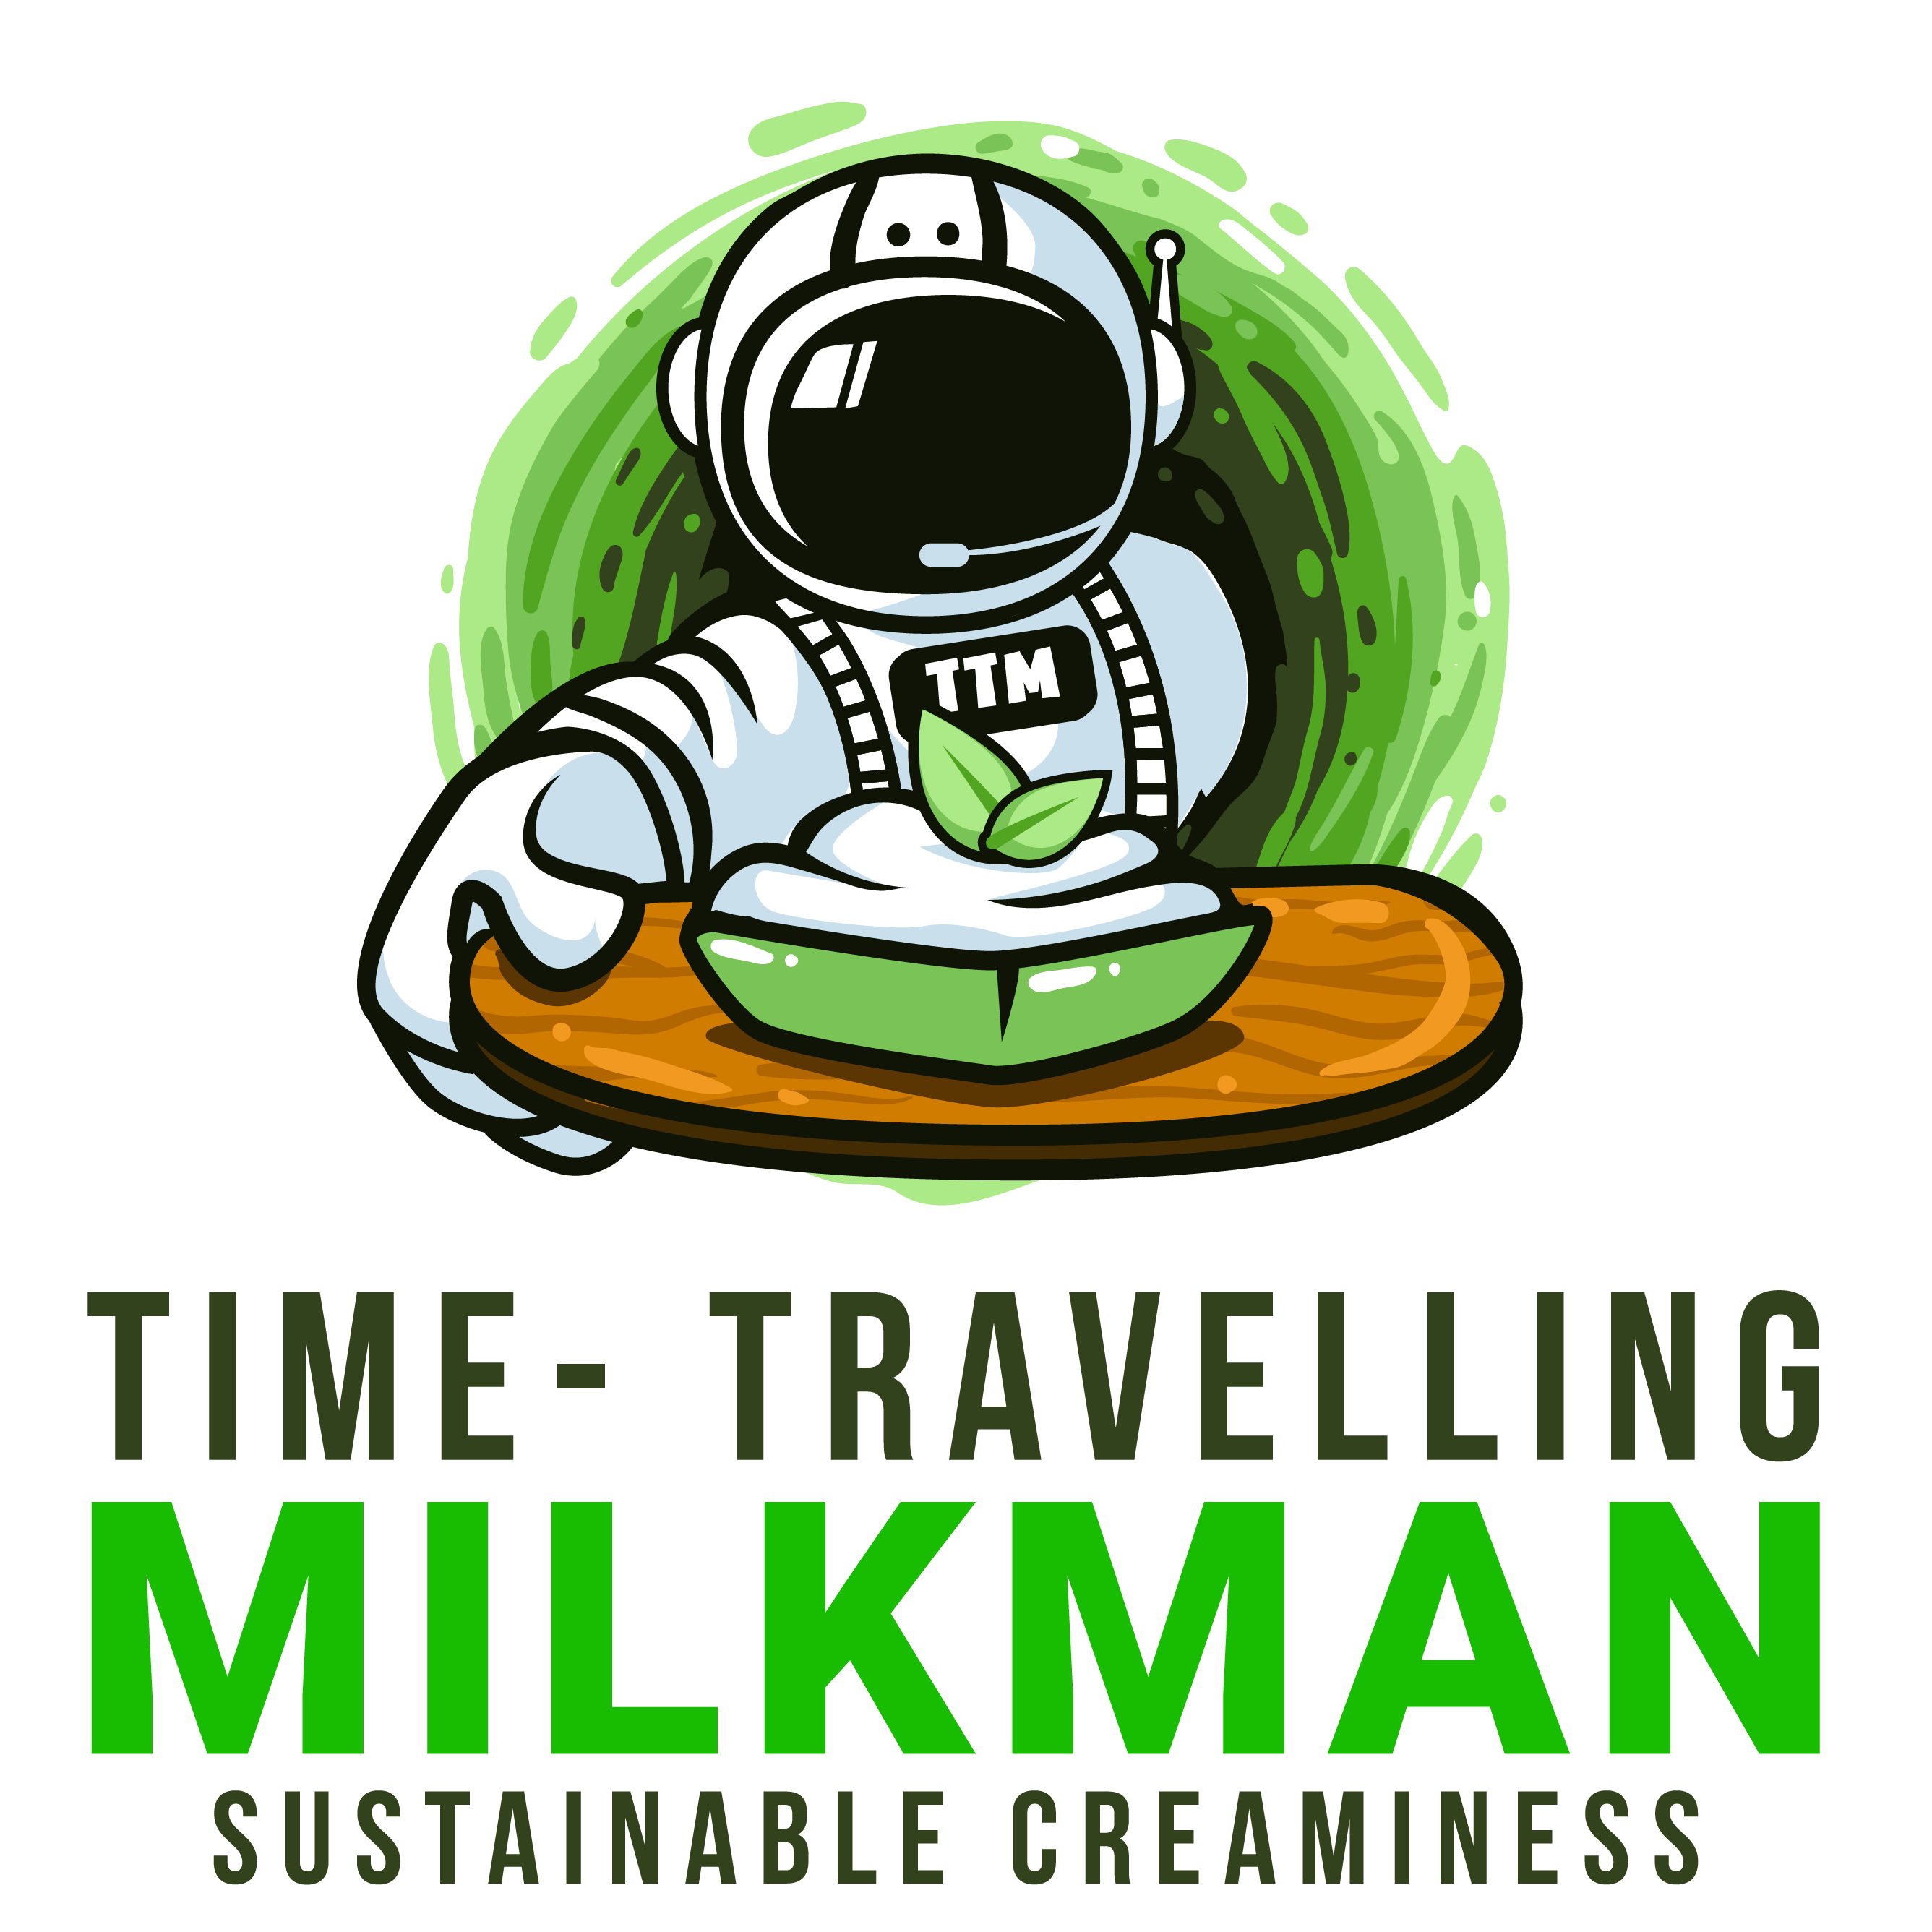 How the Time-Travelling Milkman discovered Absolute Creaminess